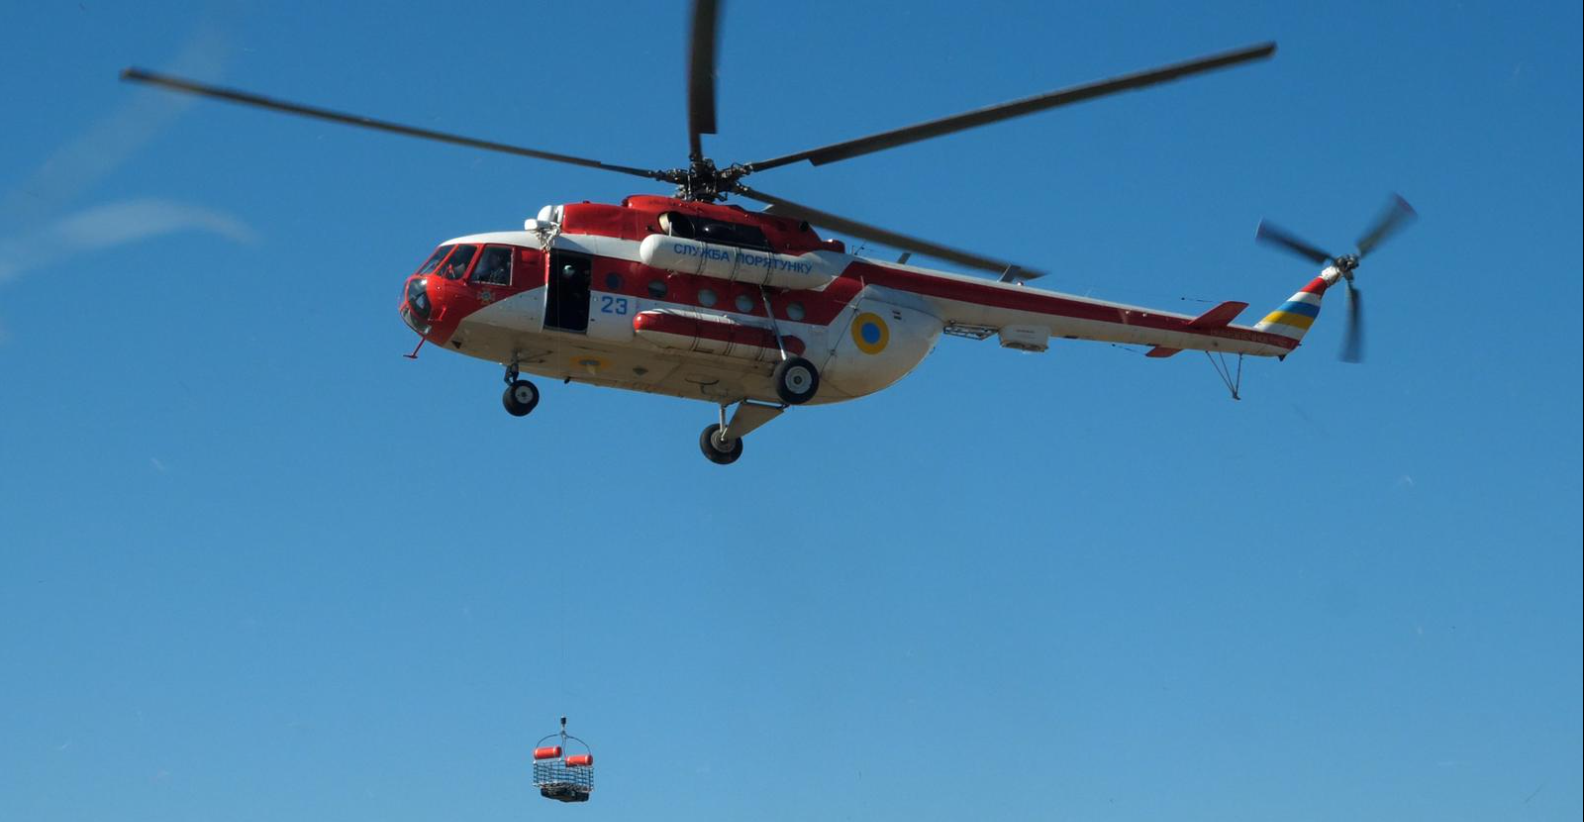 Vita Inclinata CEO hand delivers tech to Ukraine and donates American SAR helicopter system